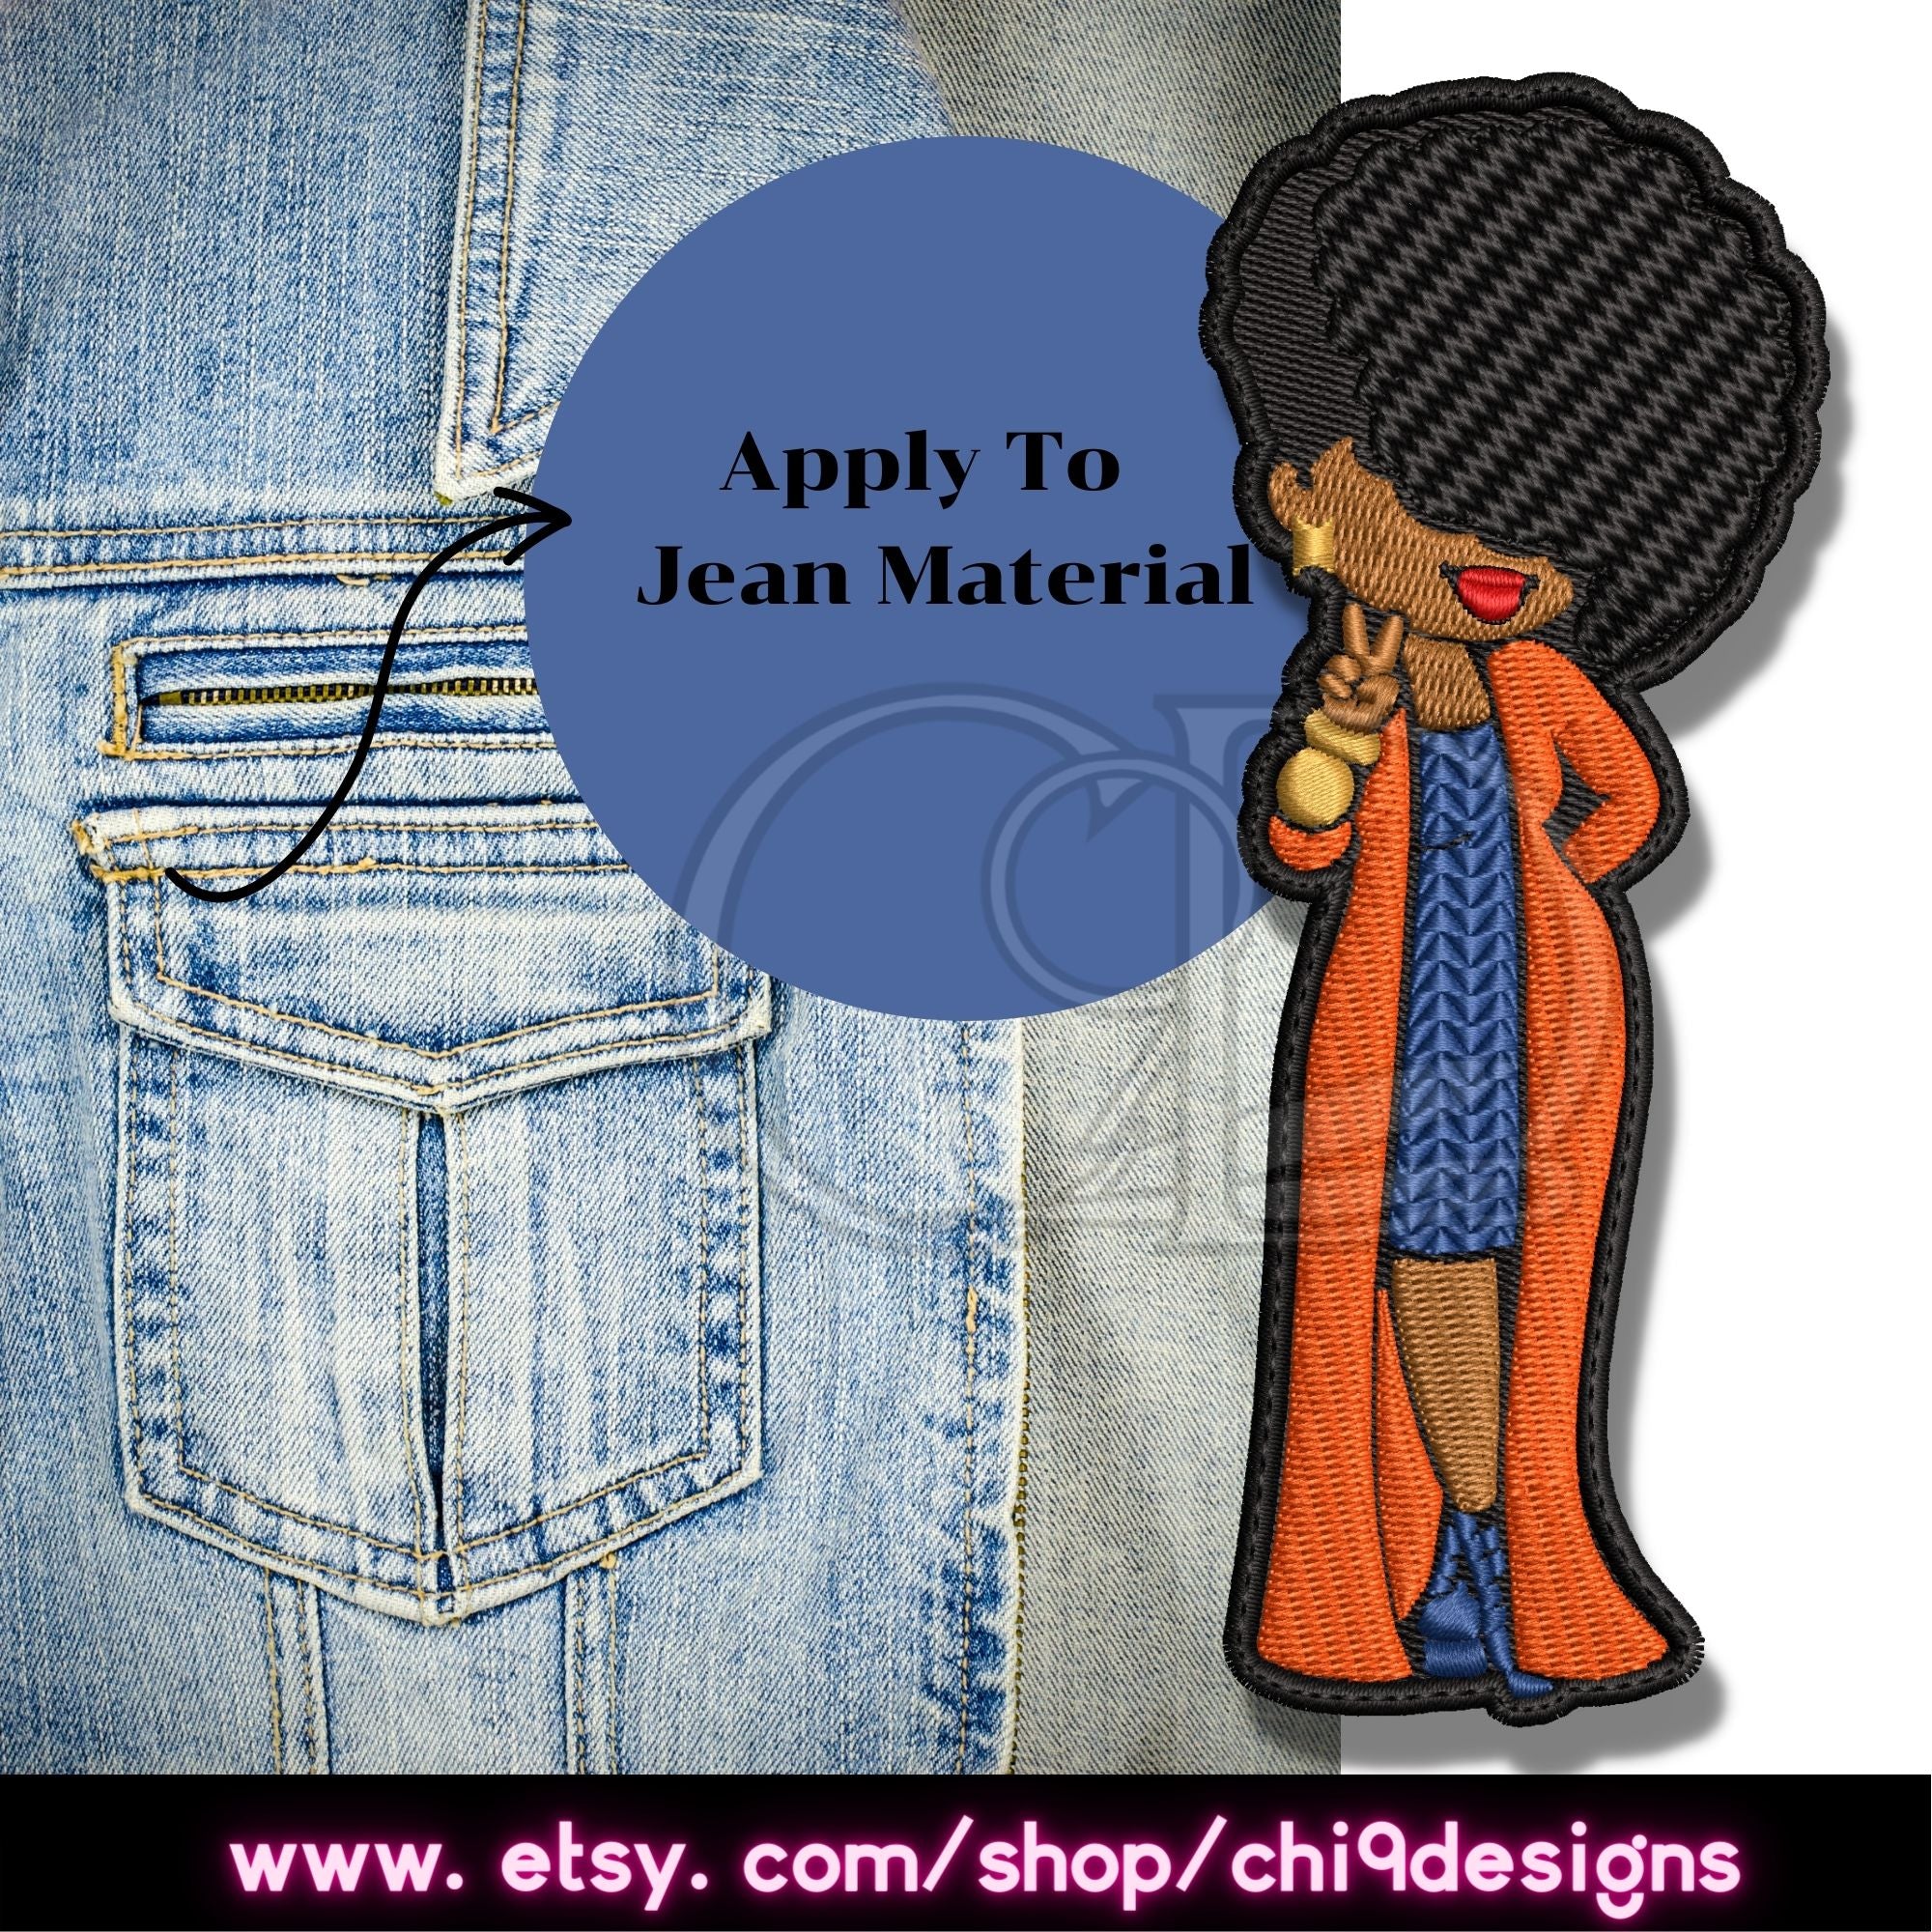 Melanin Duster Embroidered Patch with Periwinkle Clothes